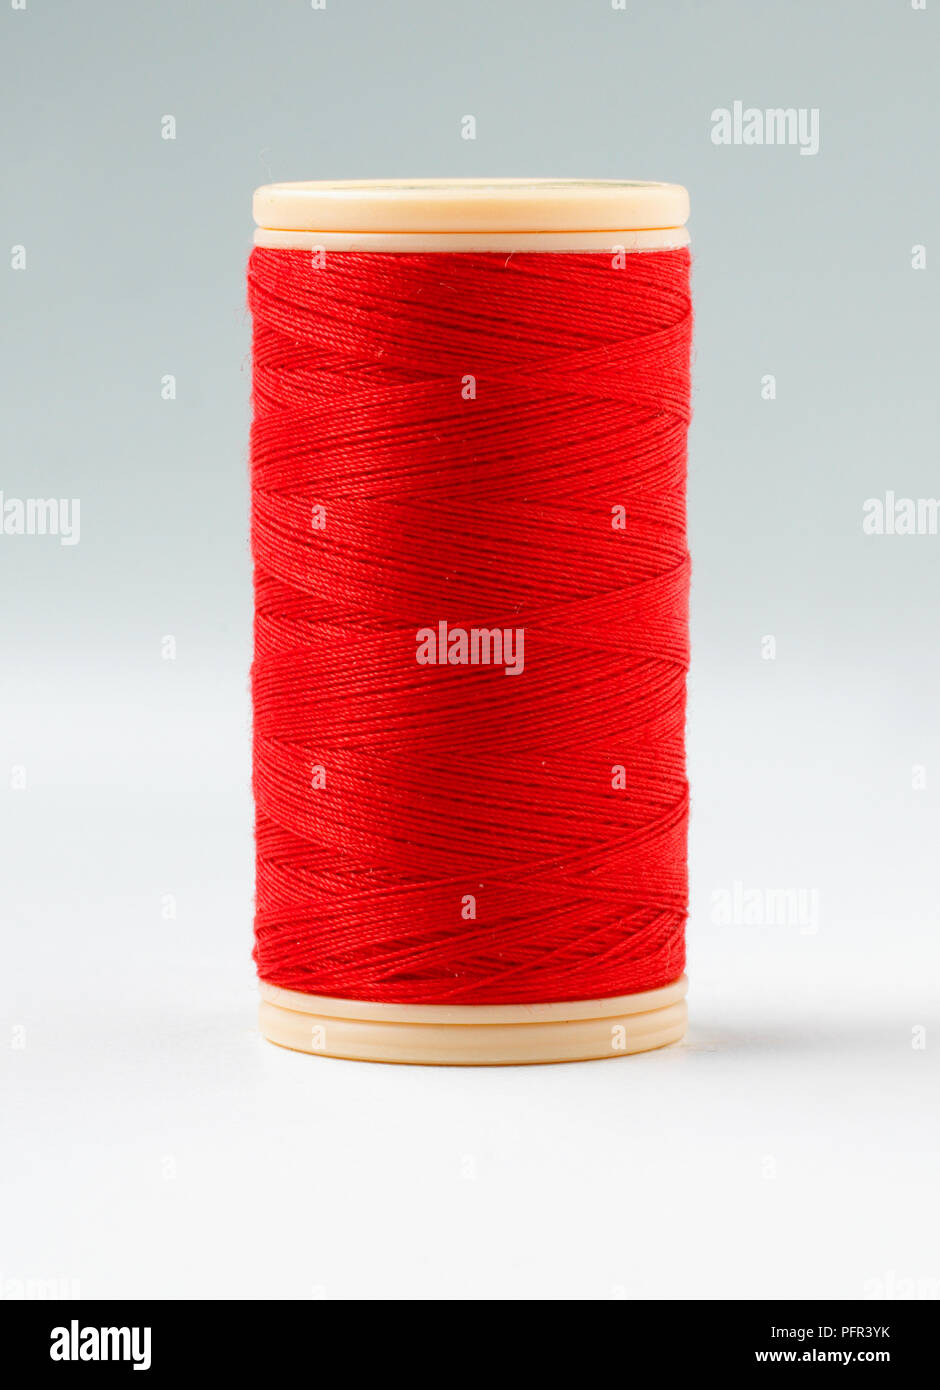 Reel of red cotton sewing thread Stock Photo